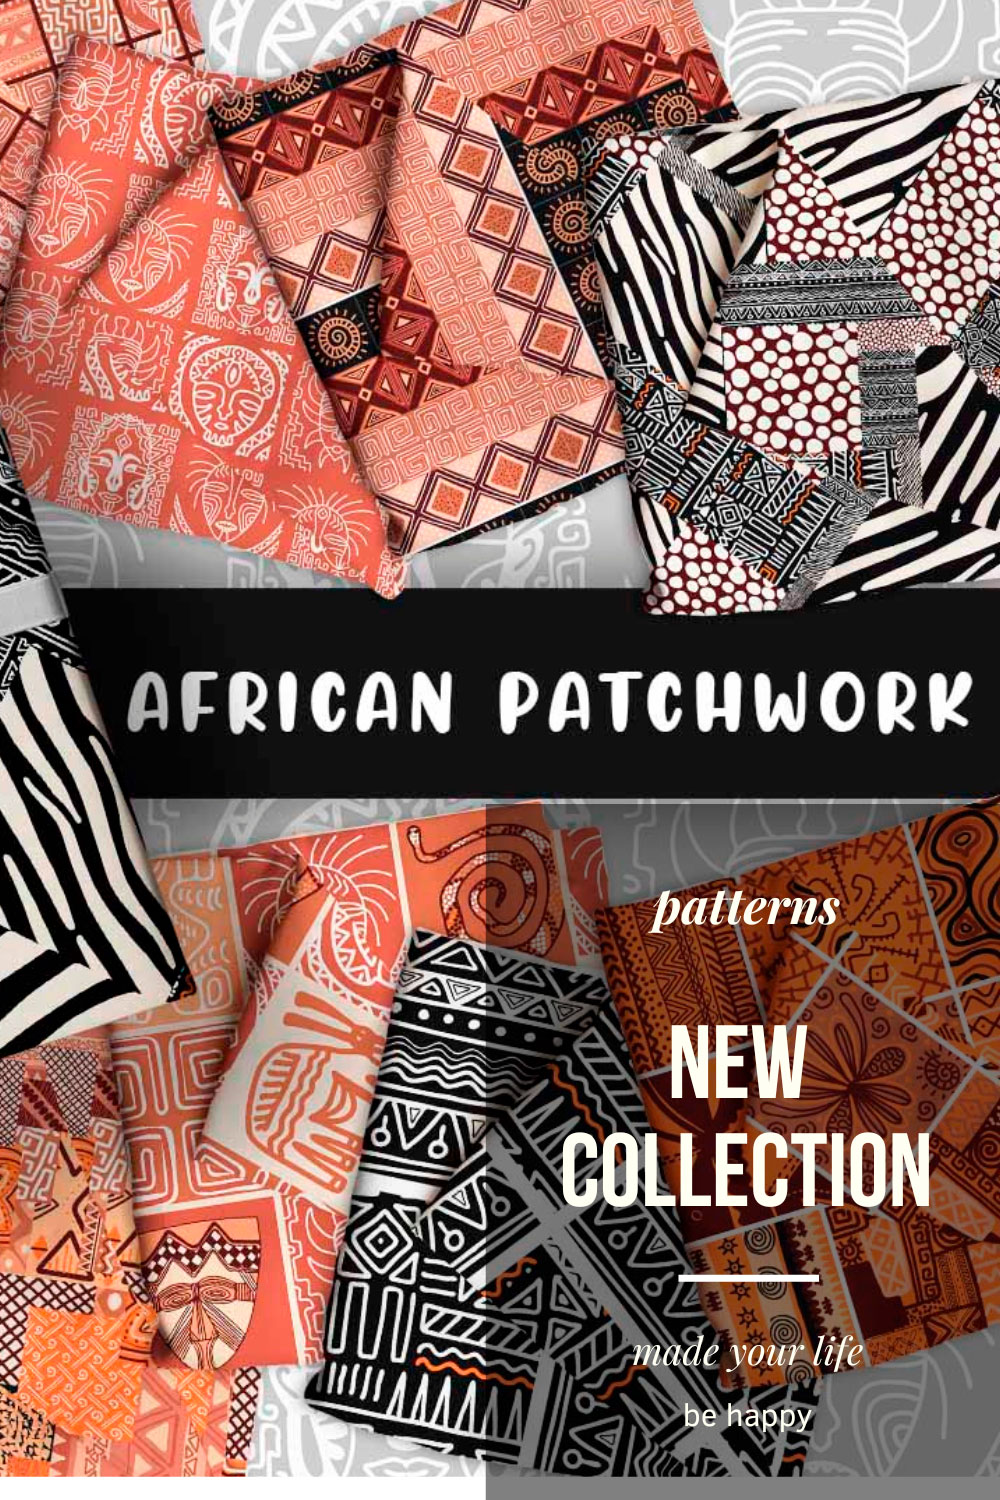 A selection of enchanting images of african patchwork patterns.